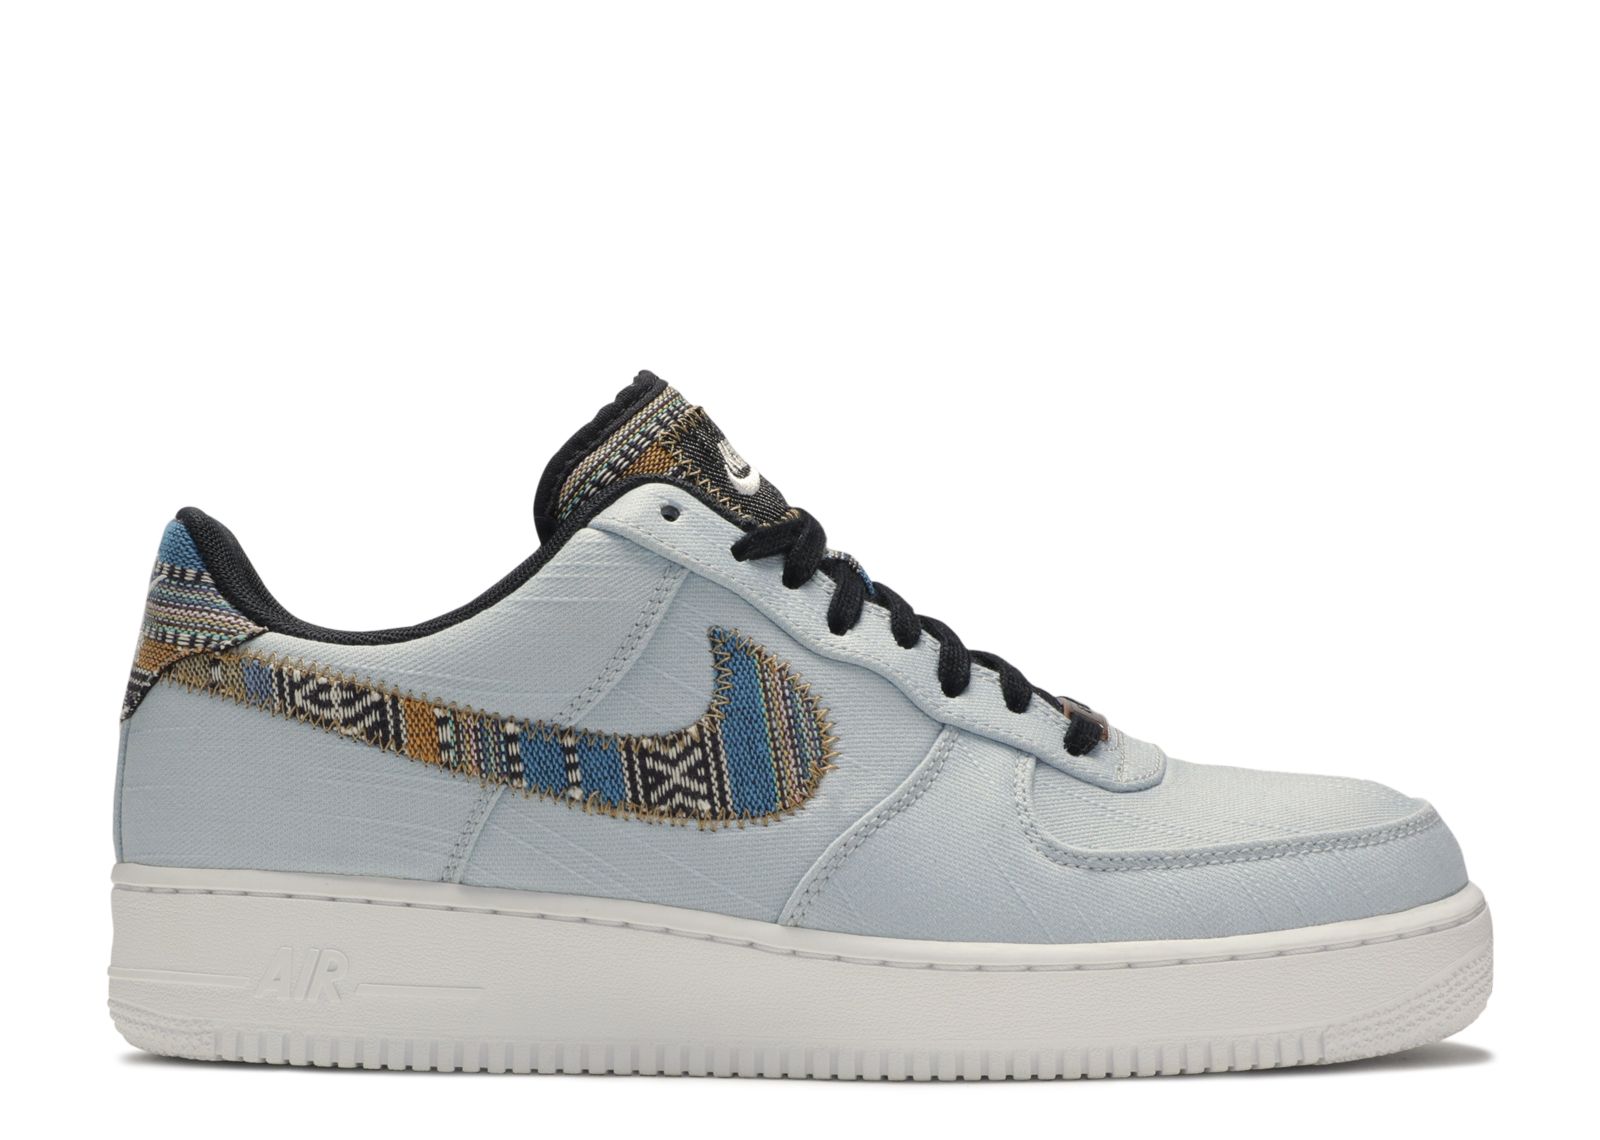 Nike Air Force 1 Low '07 LV8 Light Armory Blue 2017 for Sale, Authenticity  Guaranteed